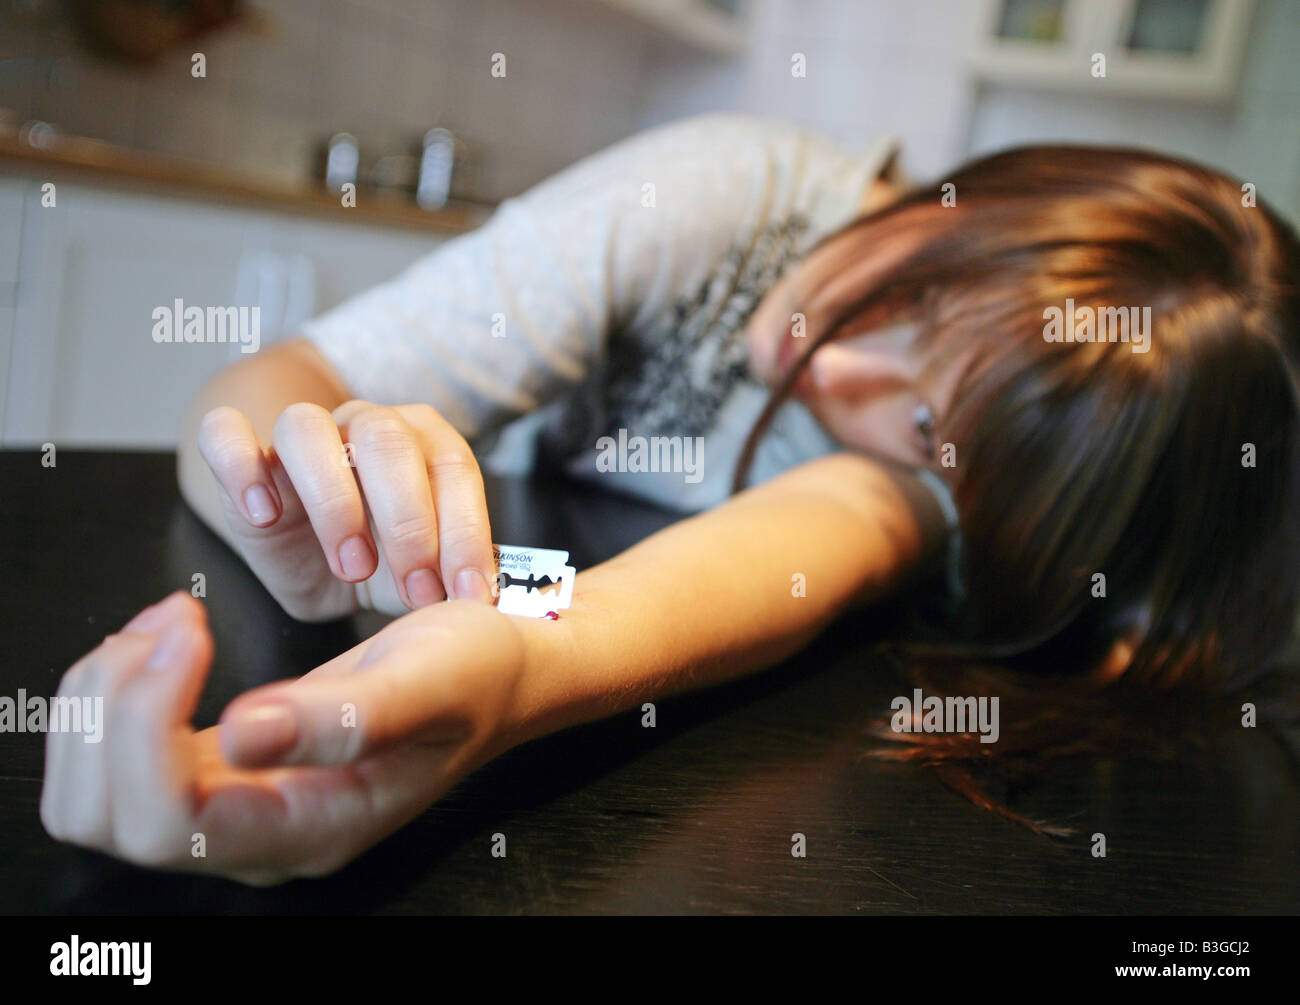 young woman hurts herself with a razor blade Stock Photo